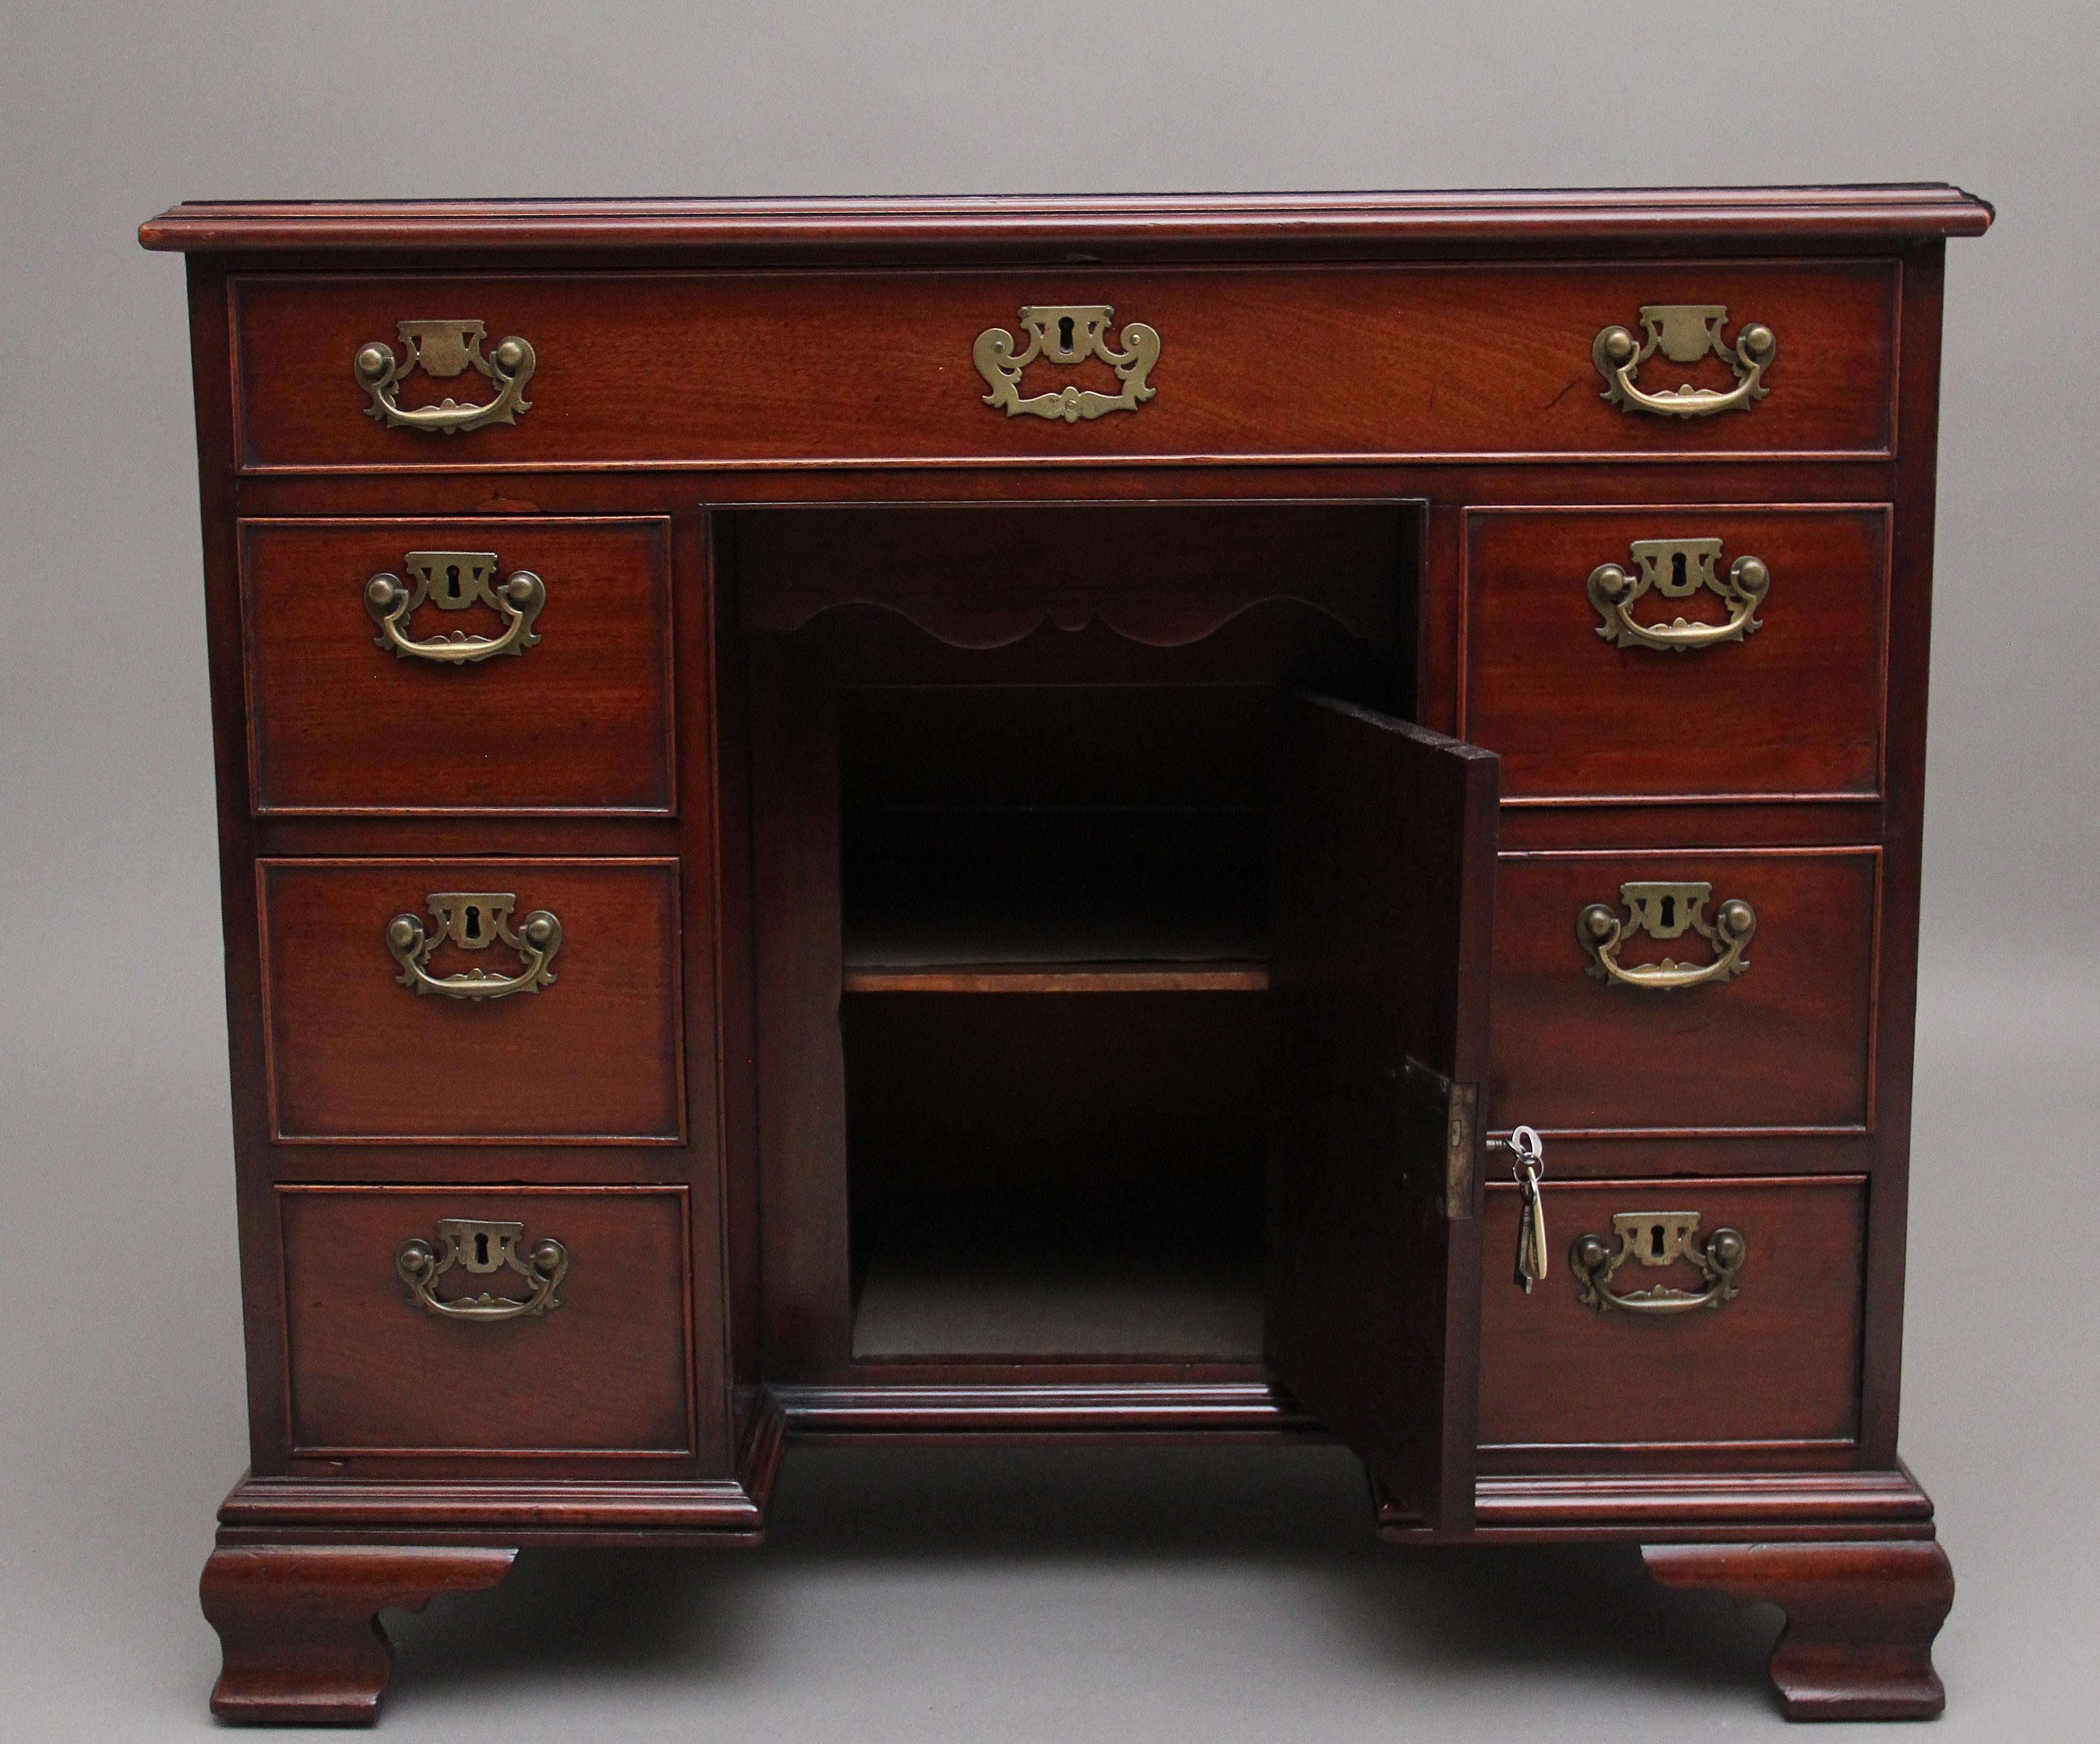 18th Century mahogany kneehole desk, having a wonderfully figured moulded edge top above a selection of seven drawers with the original brass plate handles and escutcheon, hinged cupboard door at the centre within the kneehole and a single